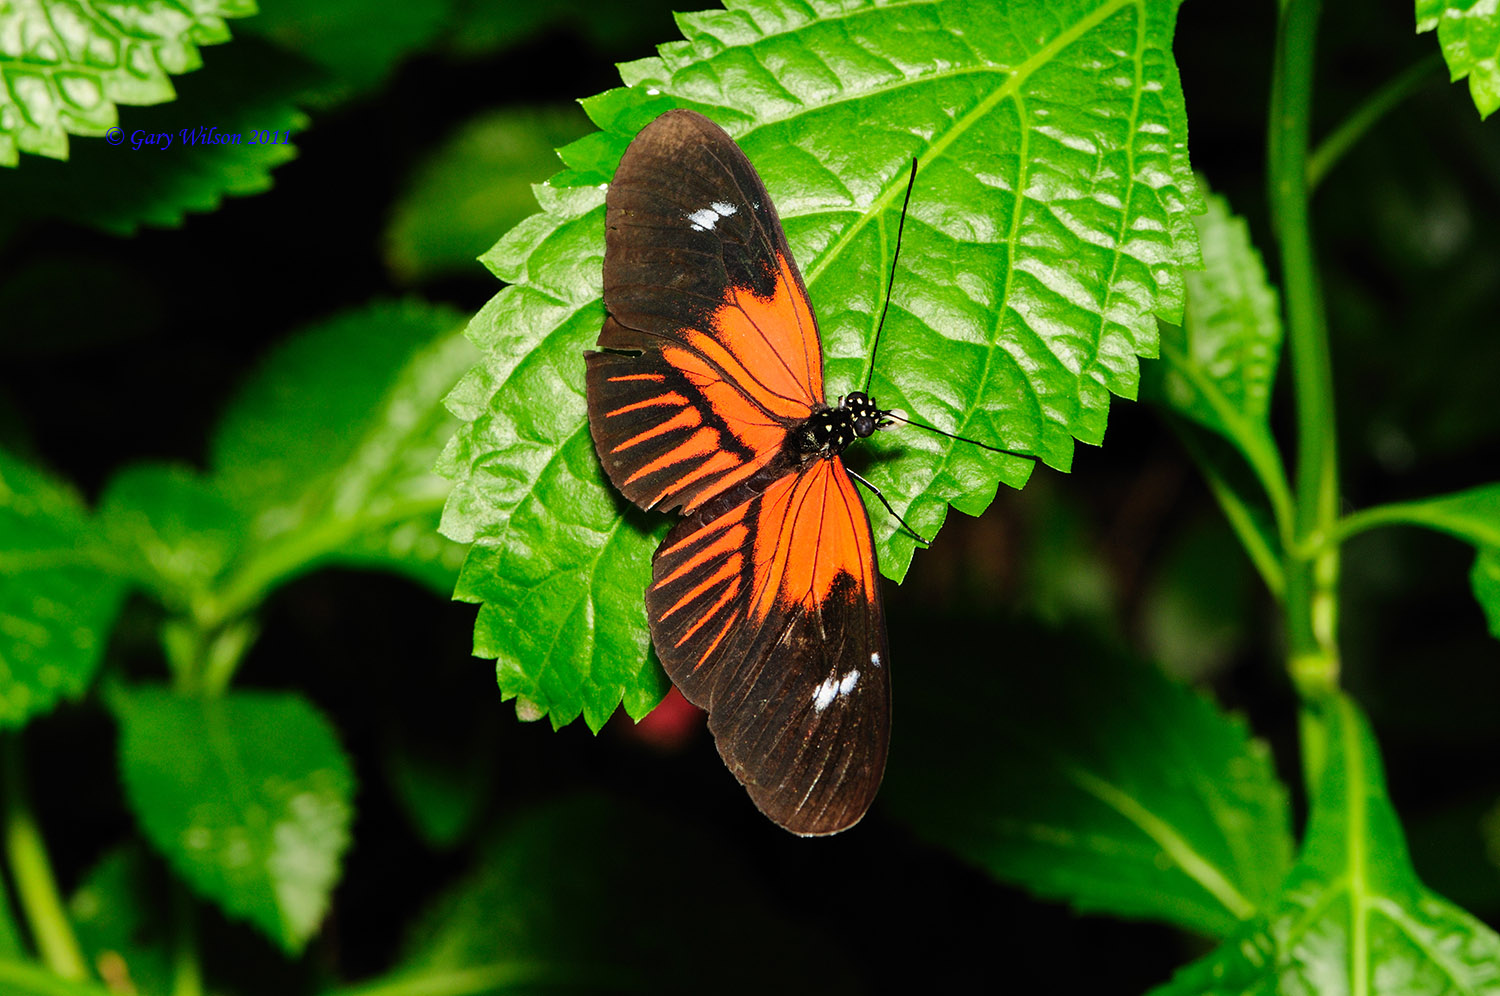 Common Longwing/Butterfly House, Missouri